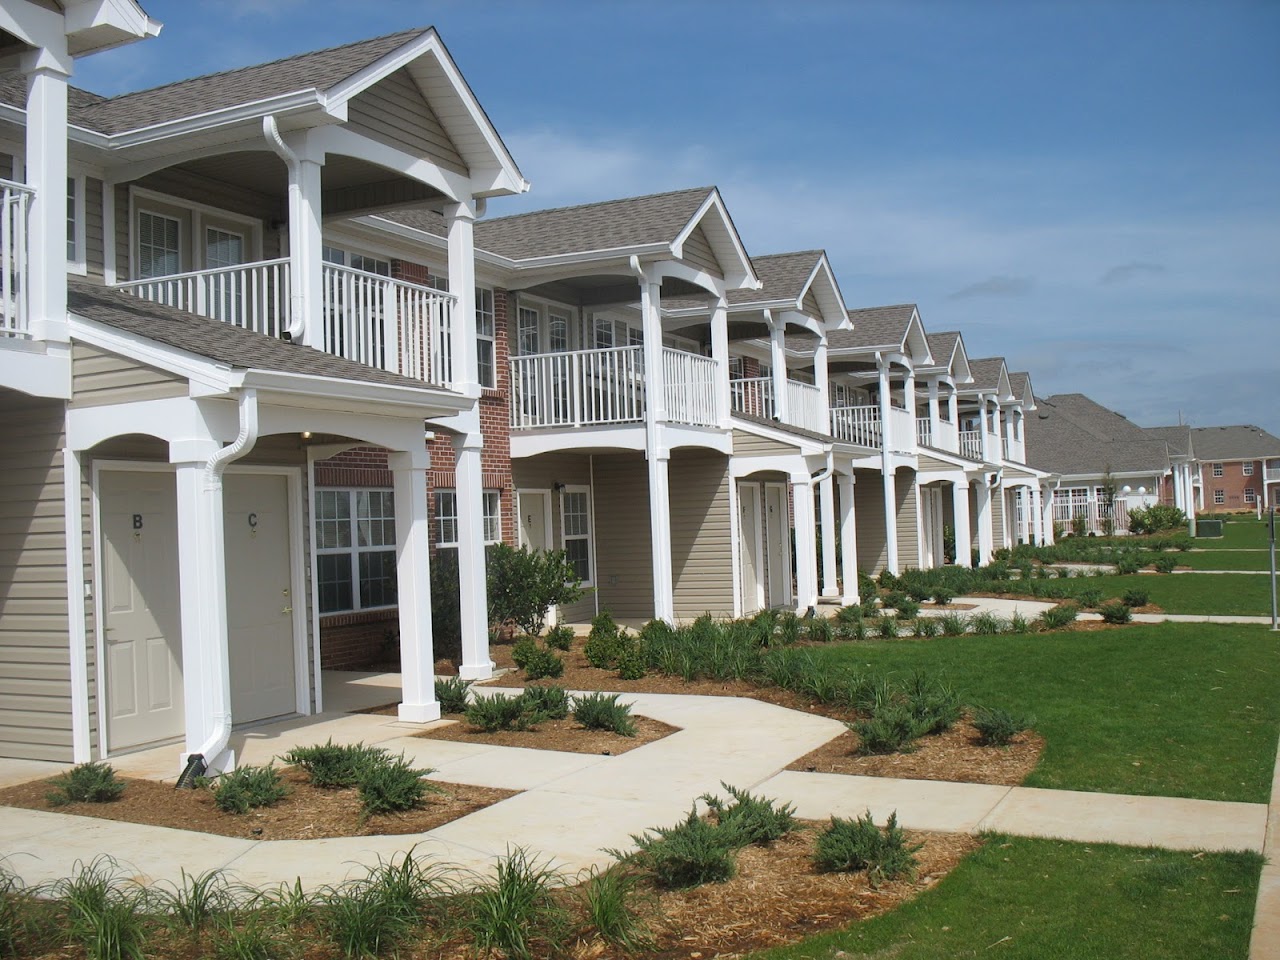 Photo of ALISON POINTE APTS. Affordable housing located at 9921 BETHANY DR FOLEY, AL 36535